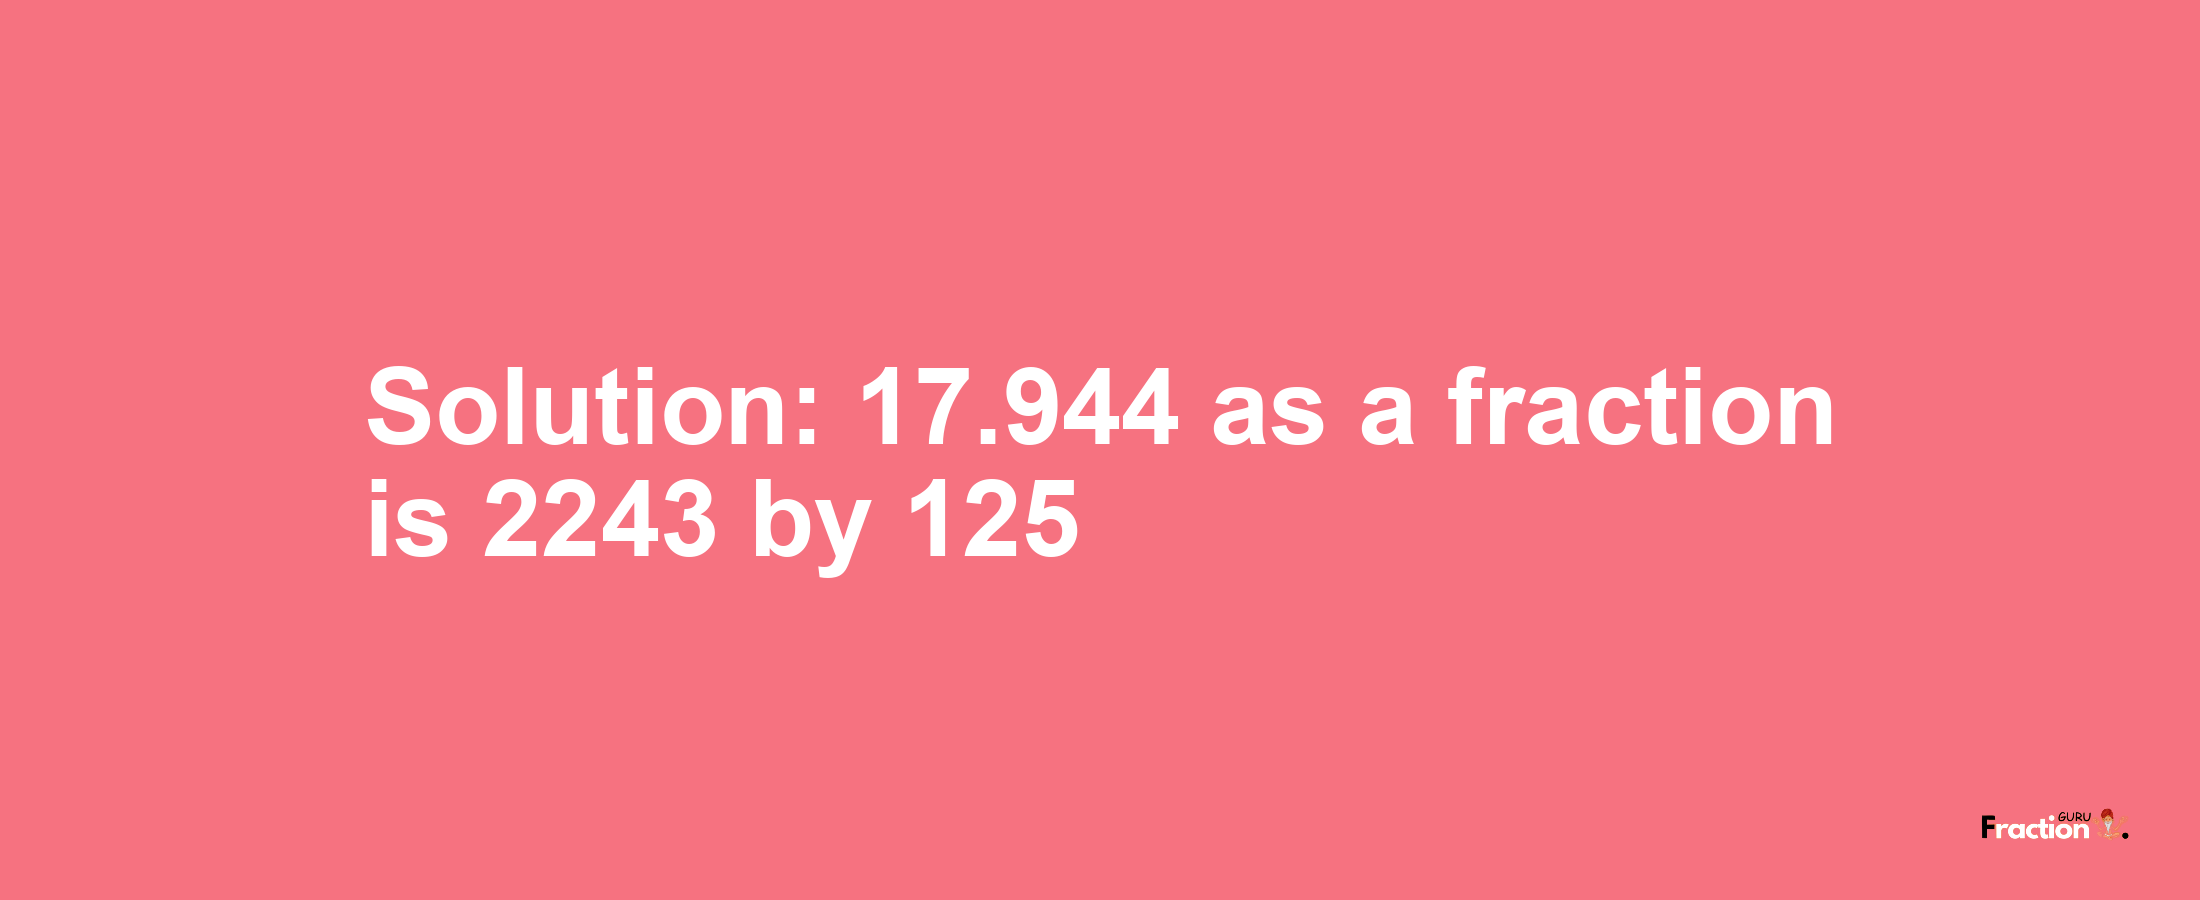 Solution:17.944 as a fraction is 2243/125